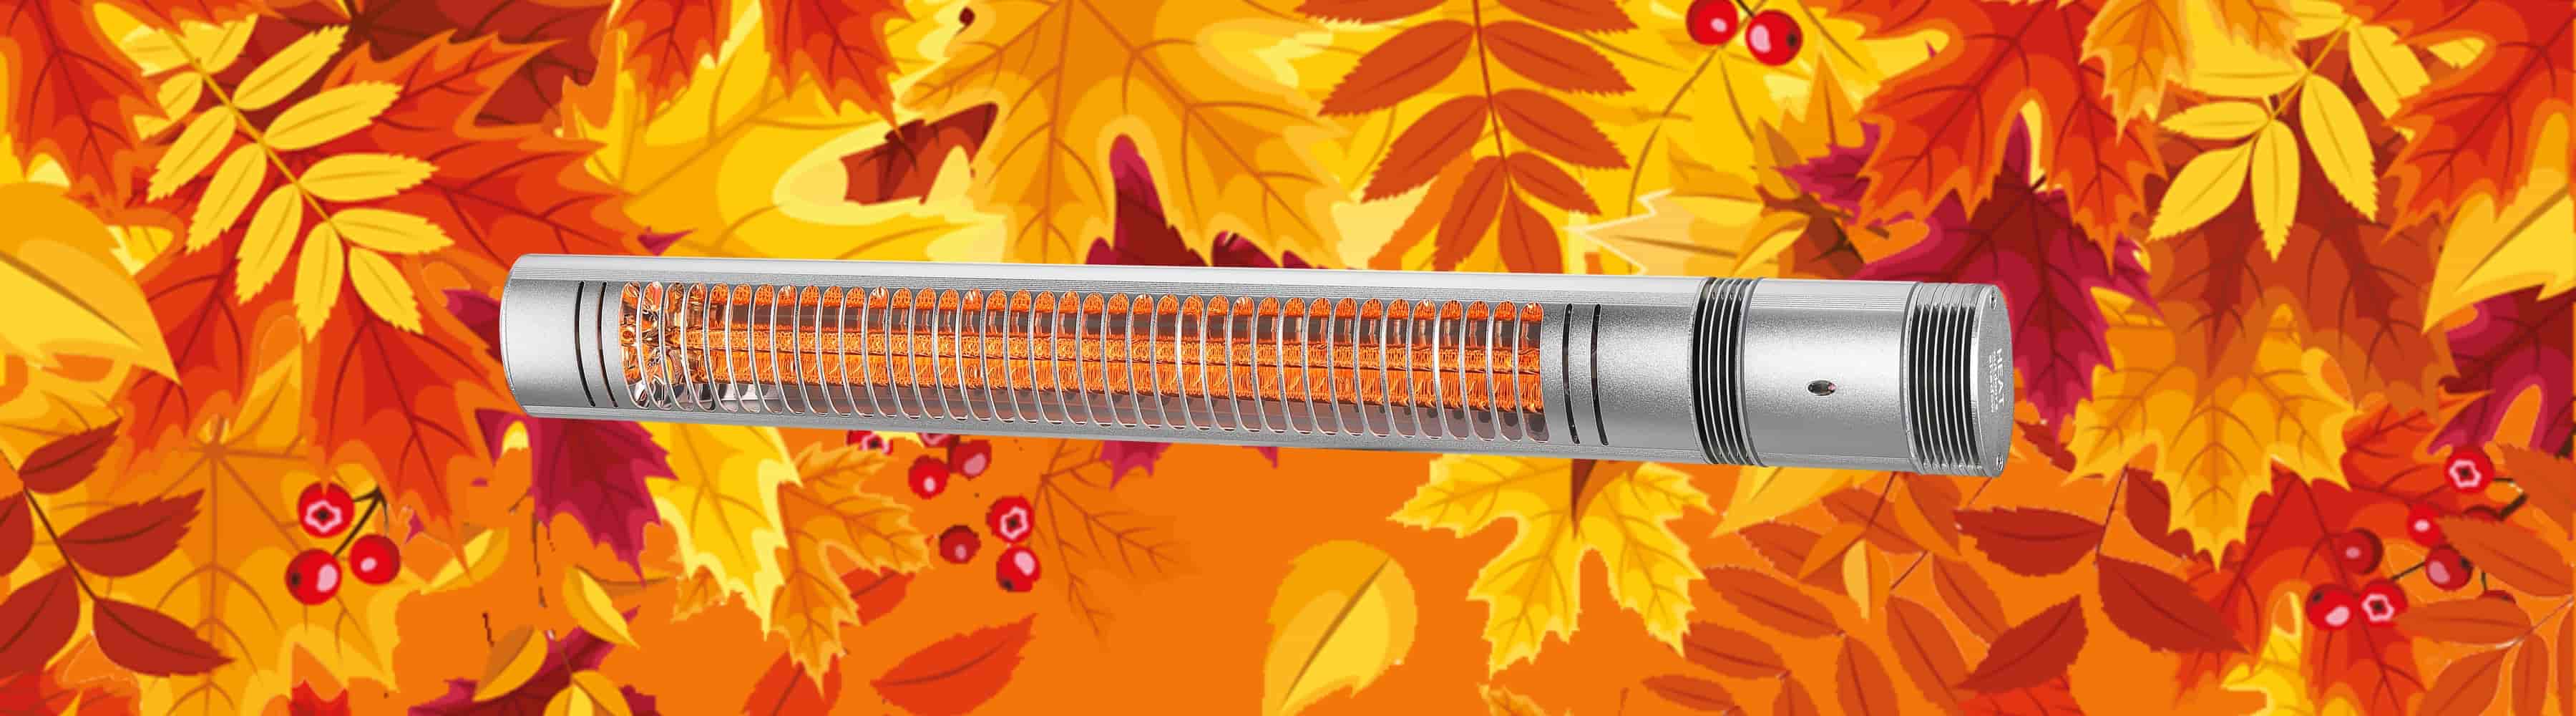 patio heater in autumn colours>
	


	
	<!-- Two-Third col -->
	<div class=